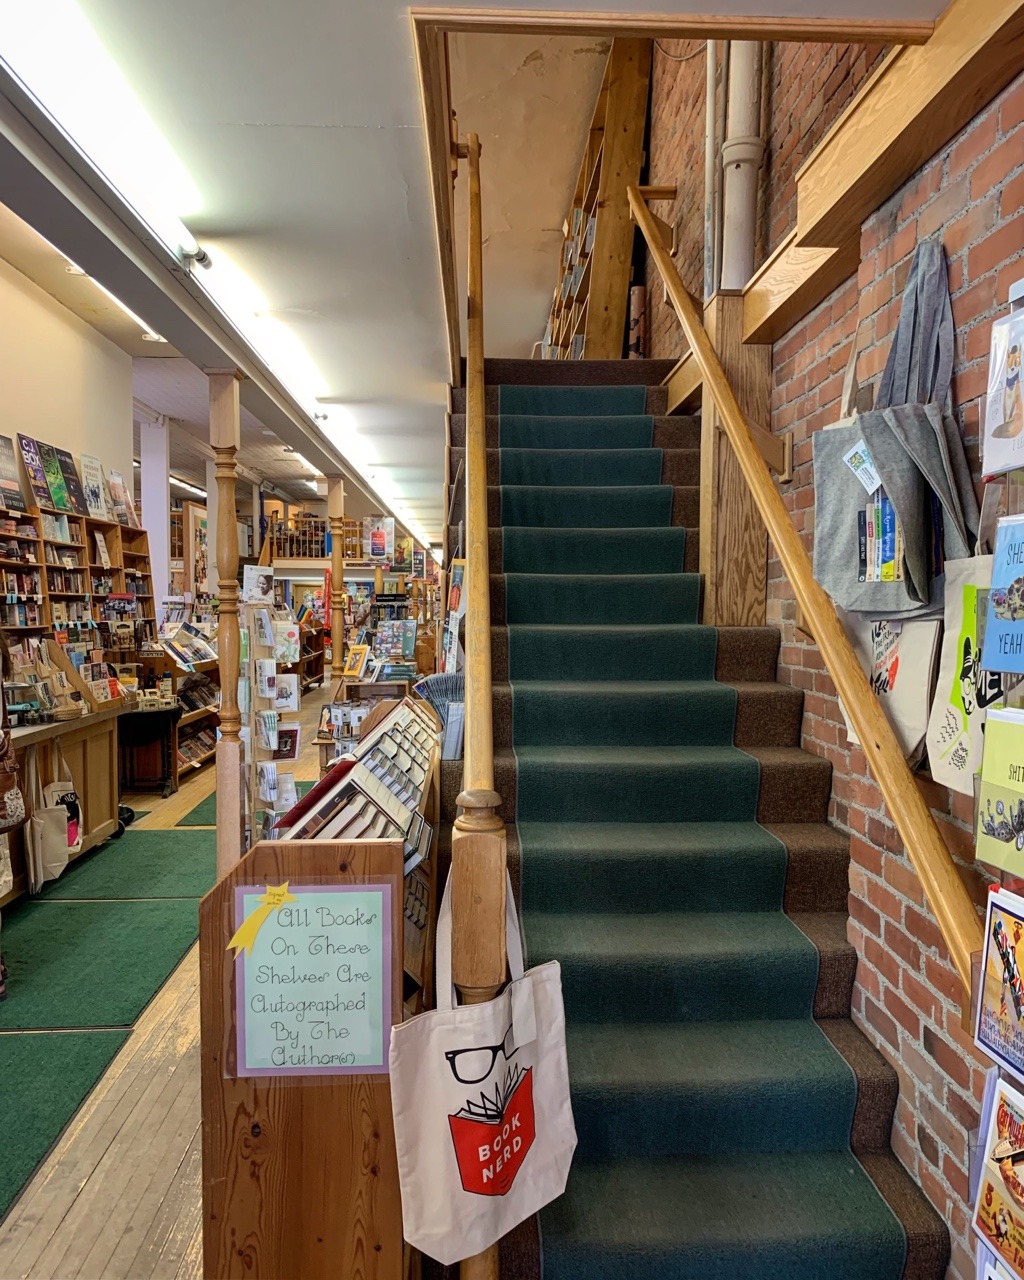 Brandon Dion Country Bookshelf Is An Independent Bookstore